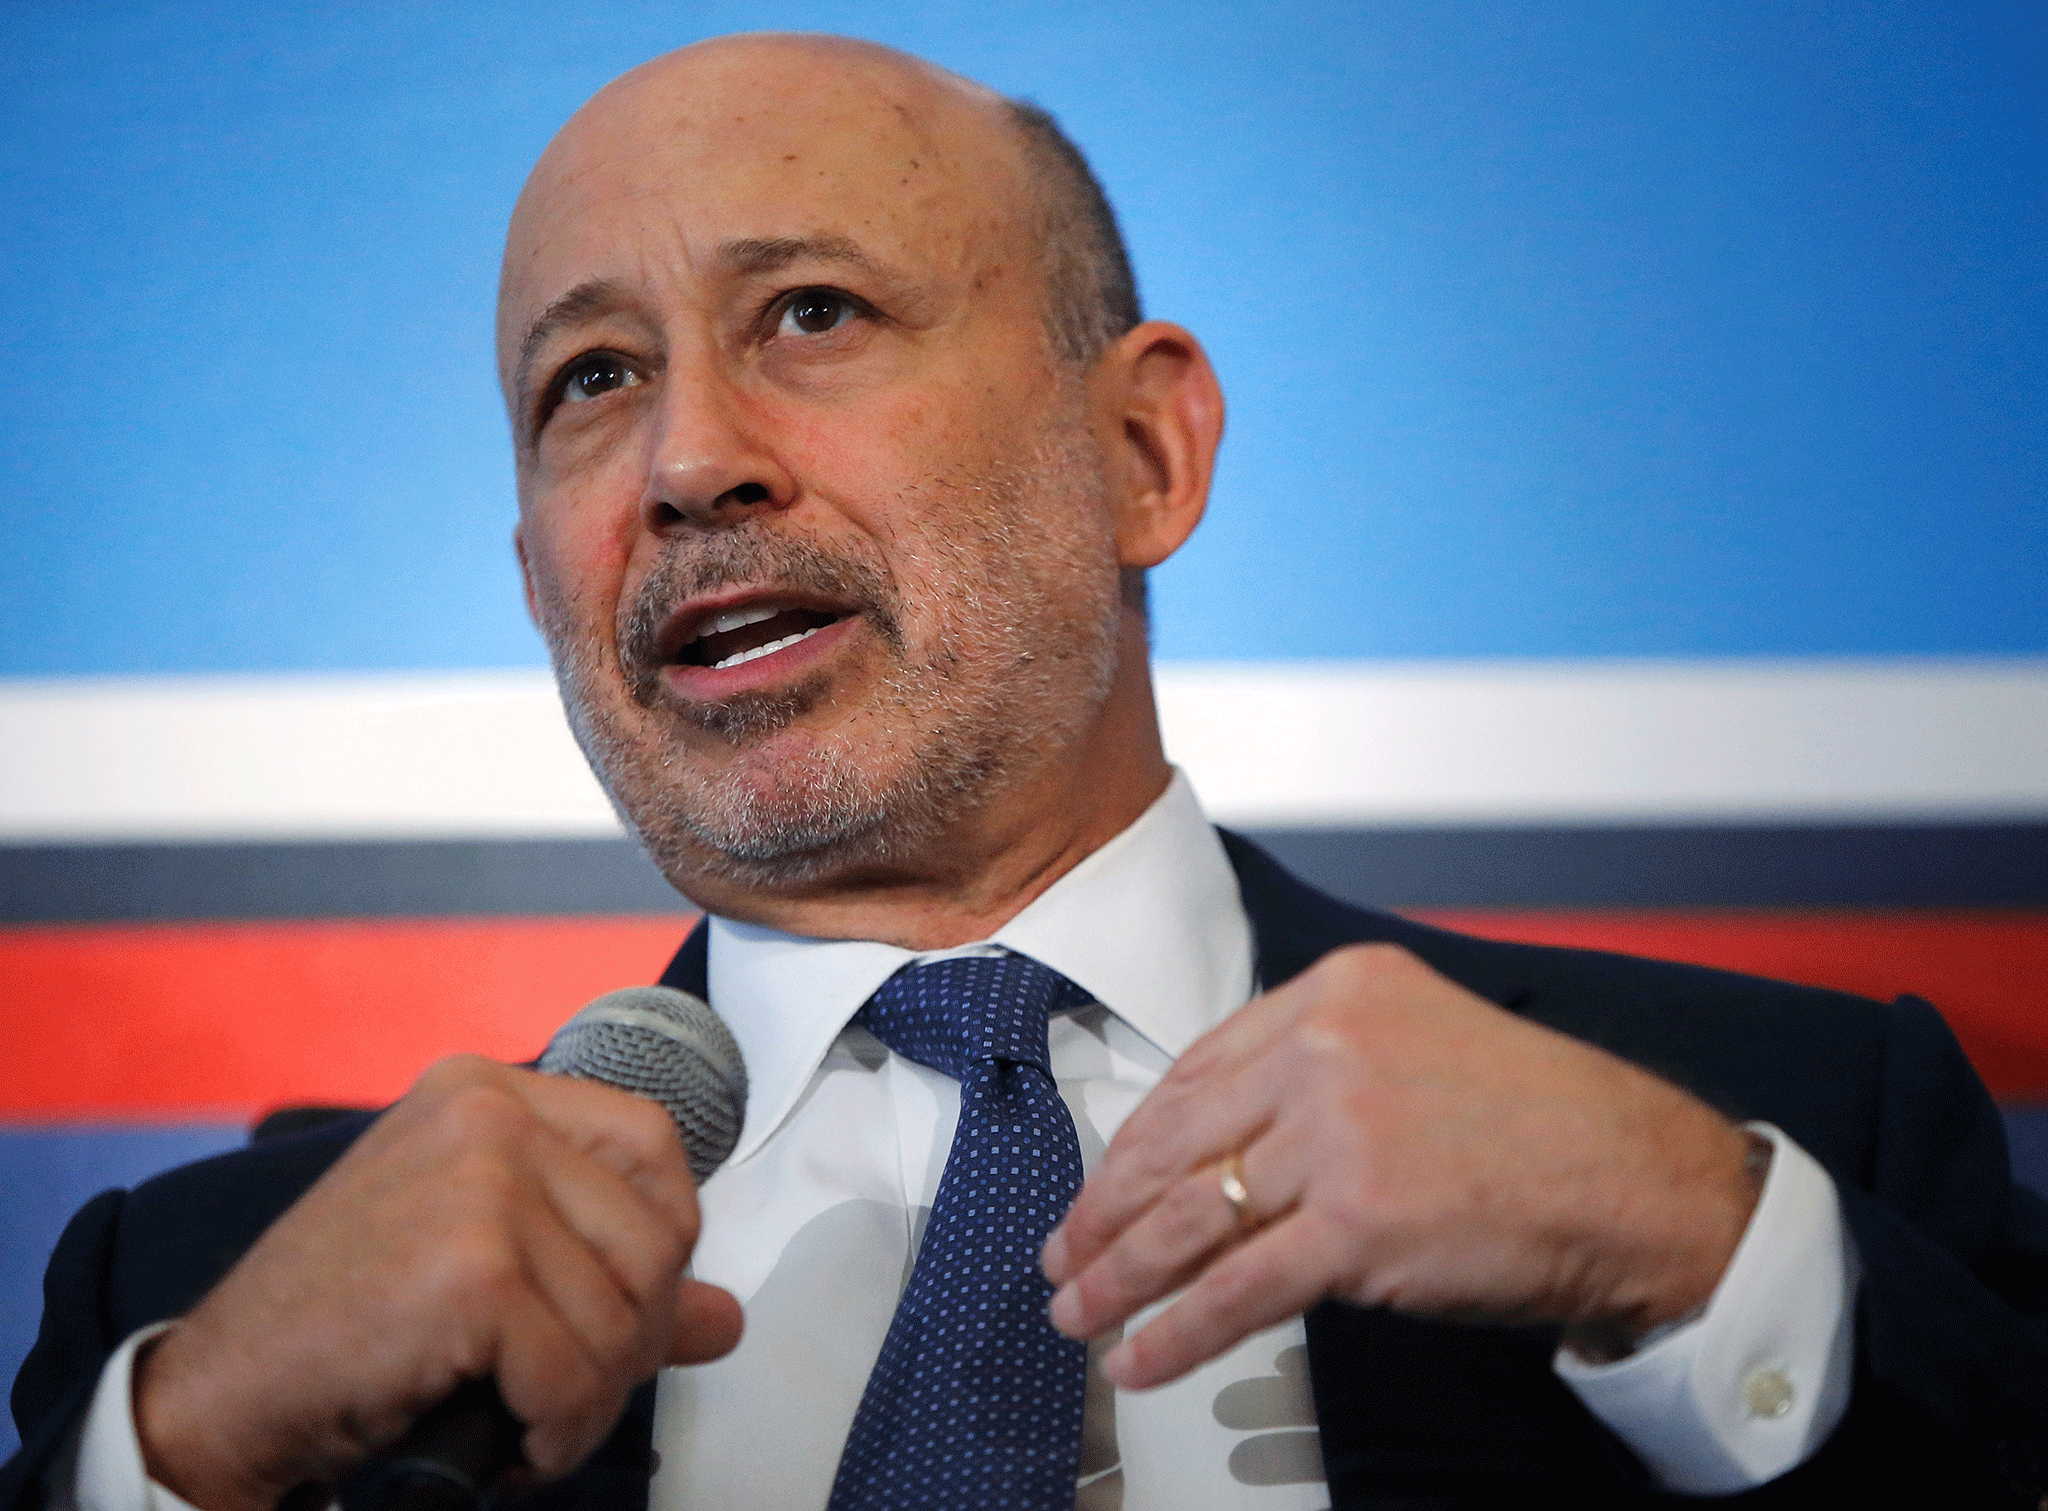 Mr Blankfein warned that longer-term decisions may drag on the UK’s growth in the future